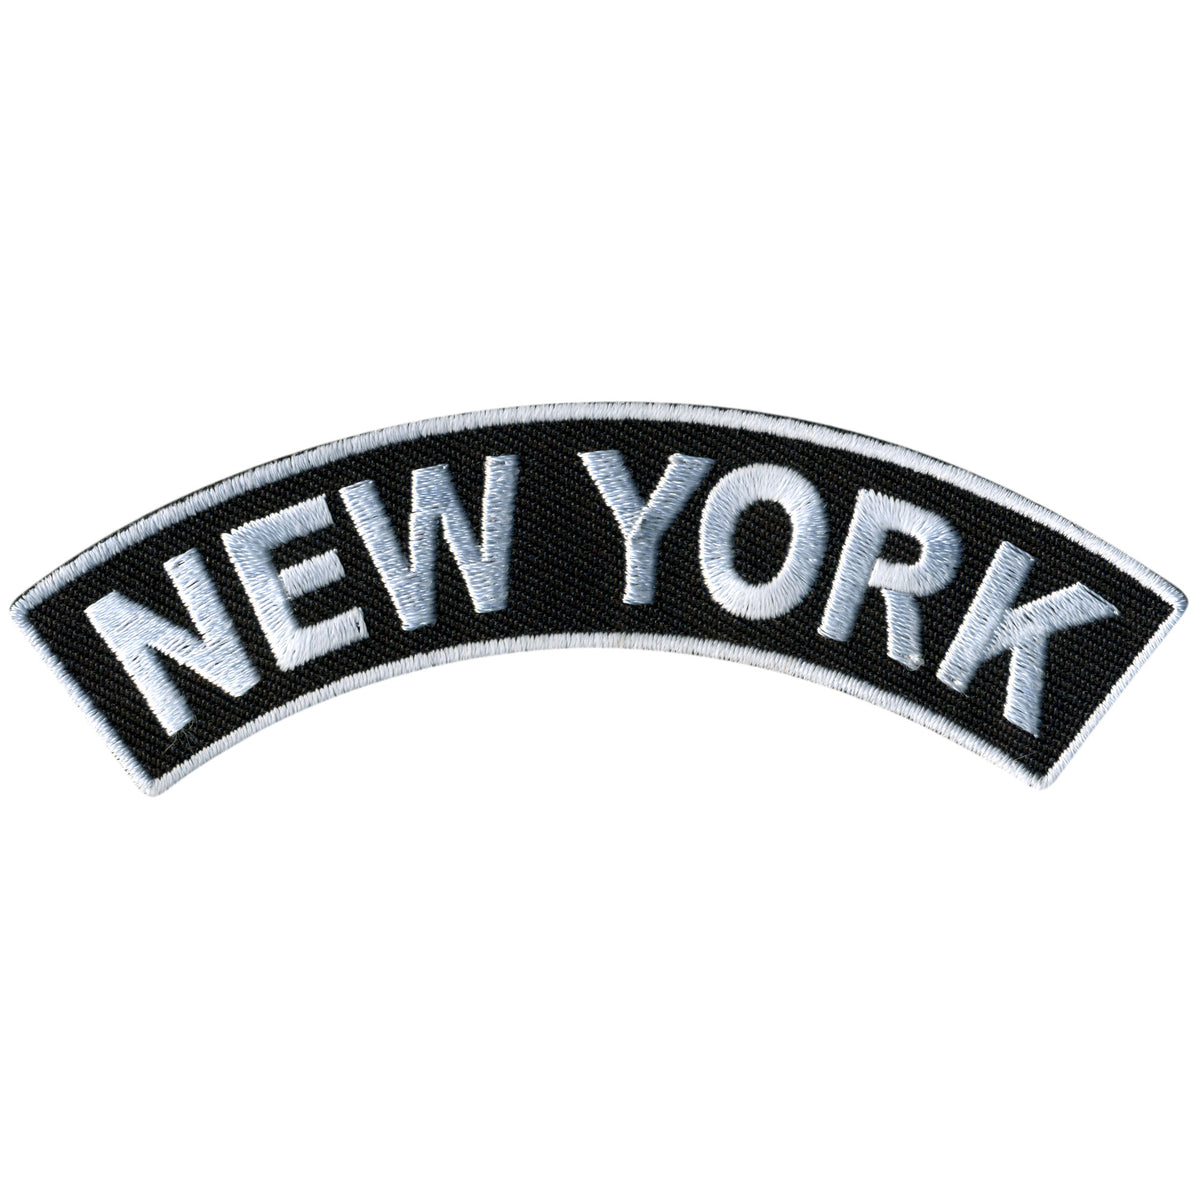 Hot Leathers New York  4” X 1” Top Rocker Patch